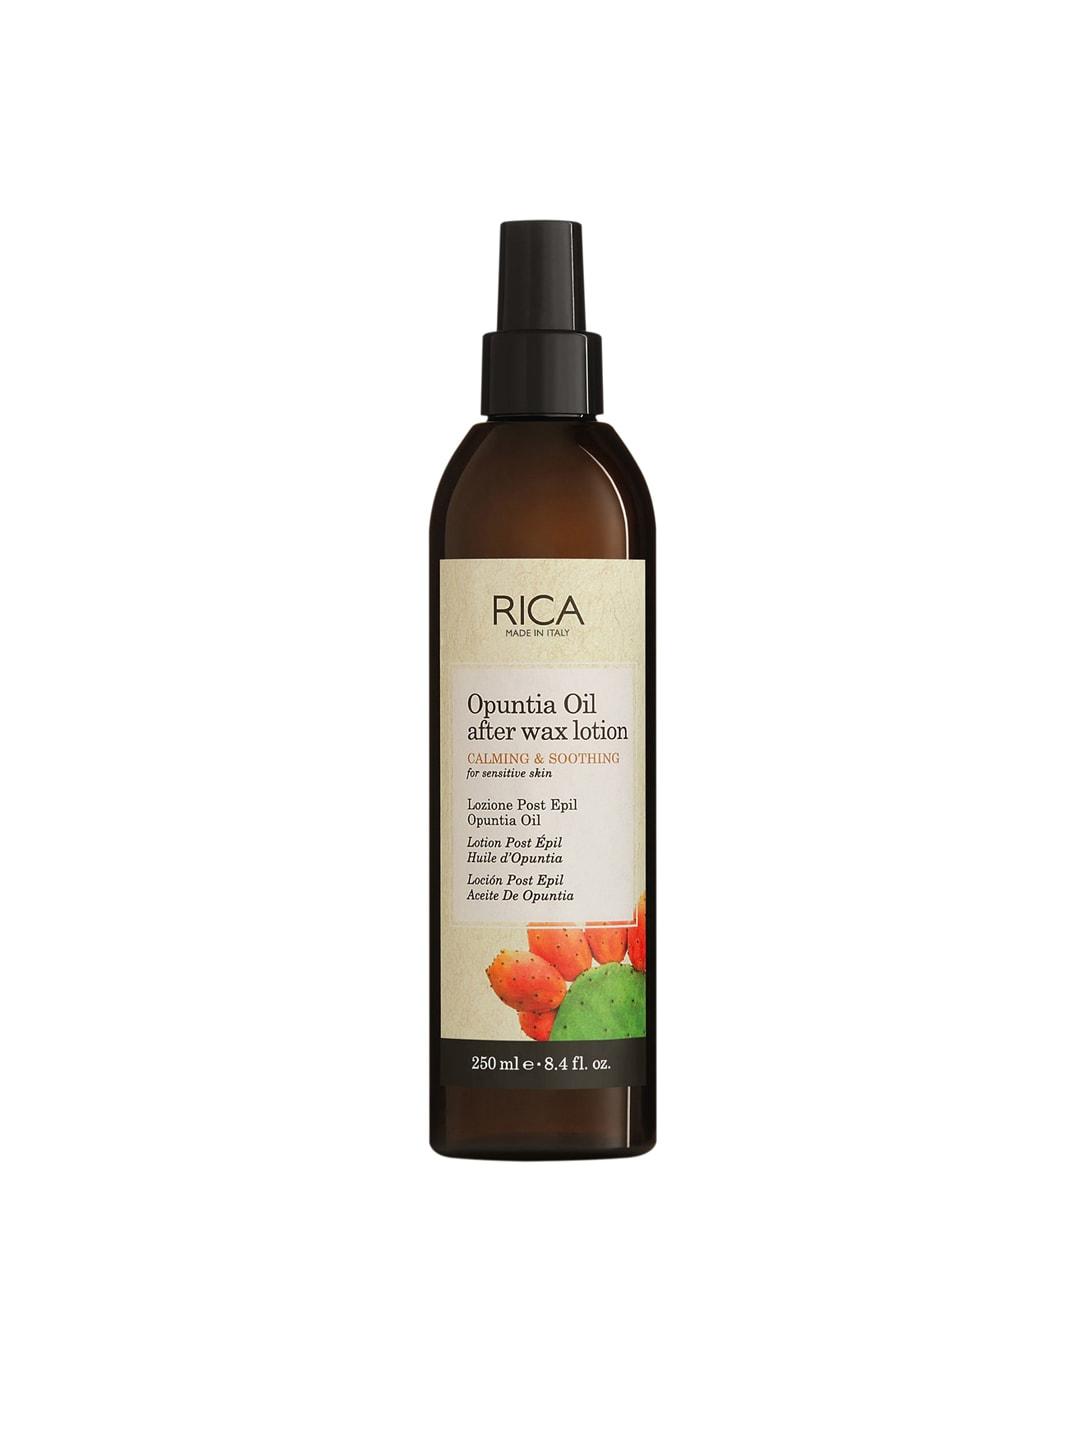 RICA Opuntia Oil After Wax Lotion 250ml